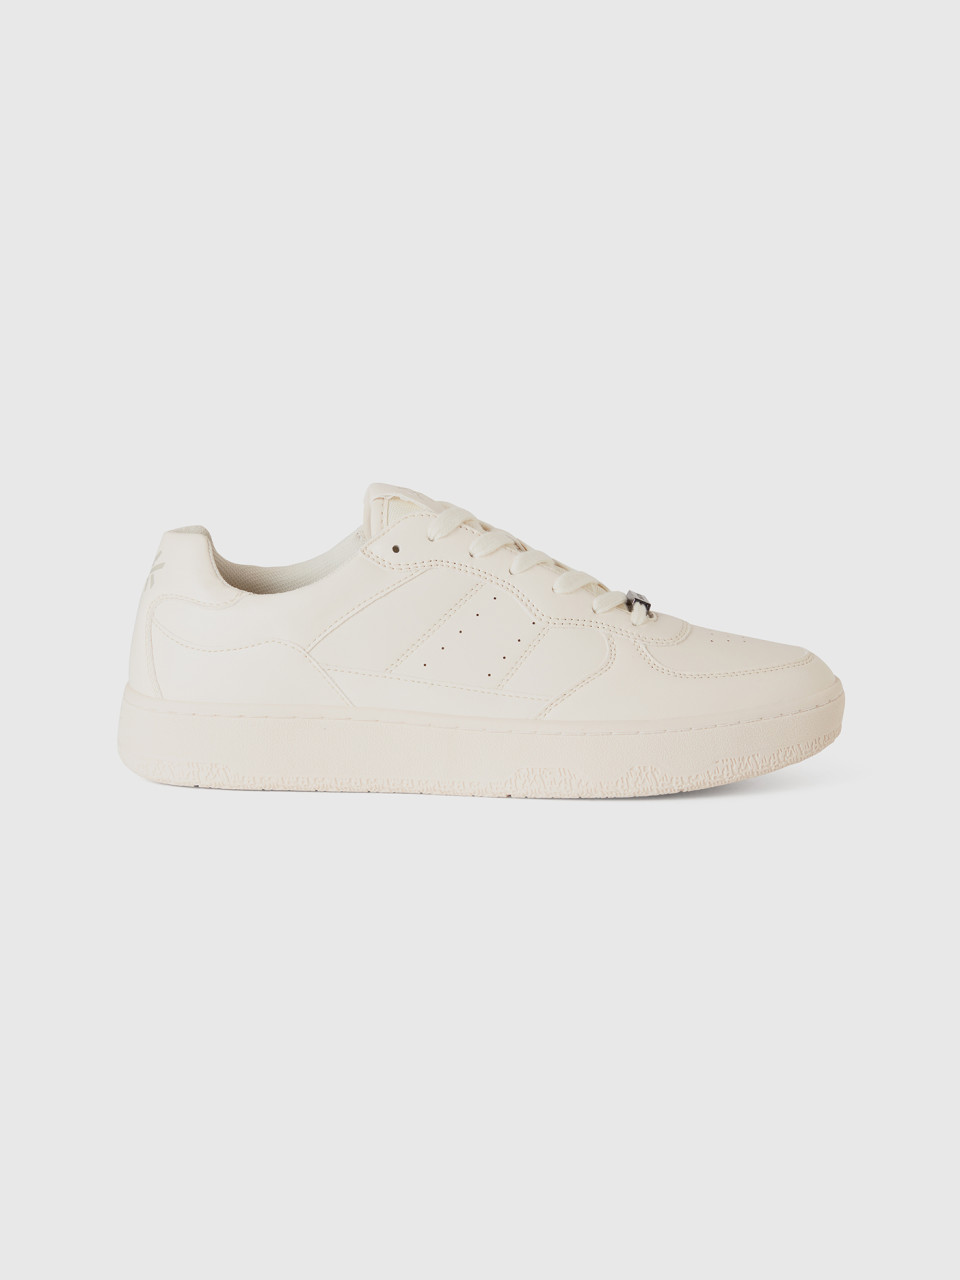 Benetton, Low-top Sneakers In Imitation Leather,5-9, Creamy White